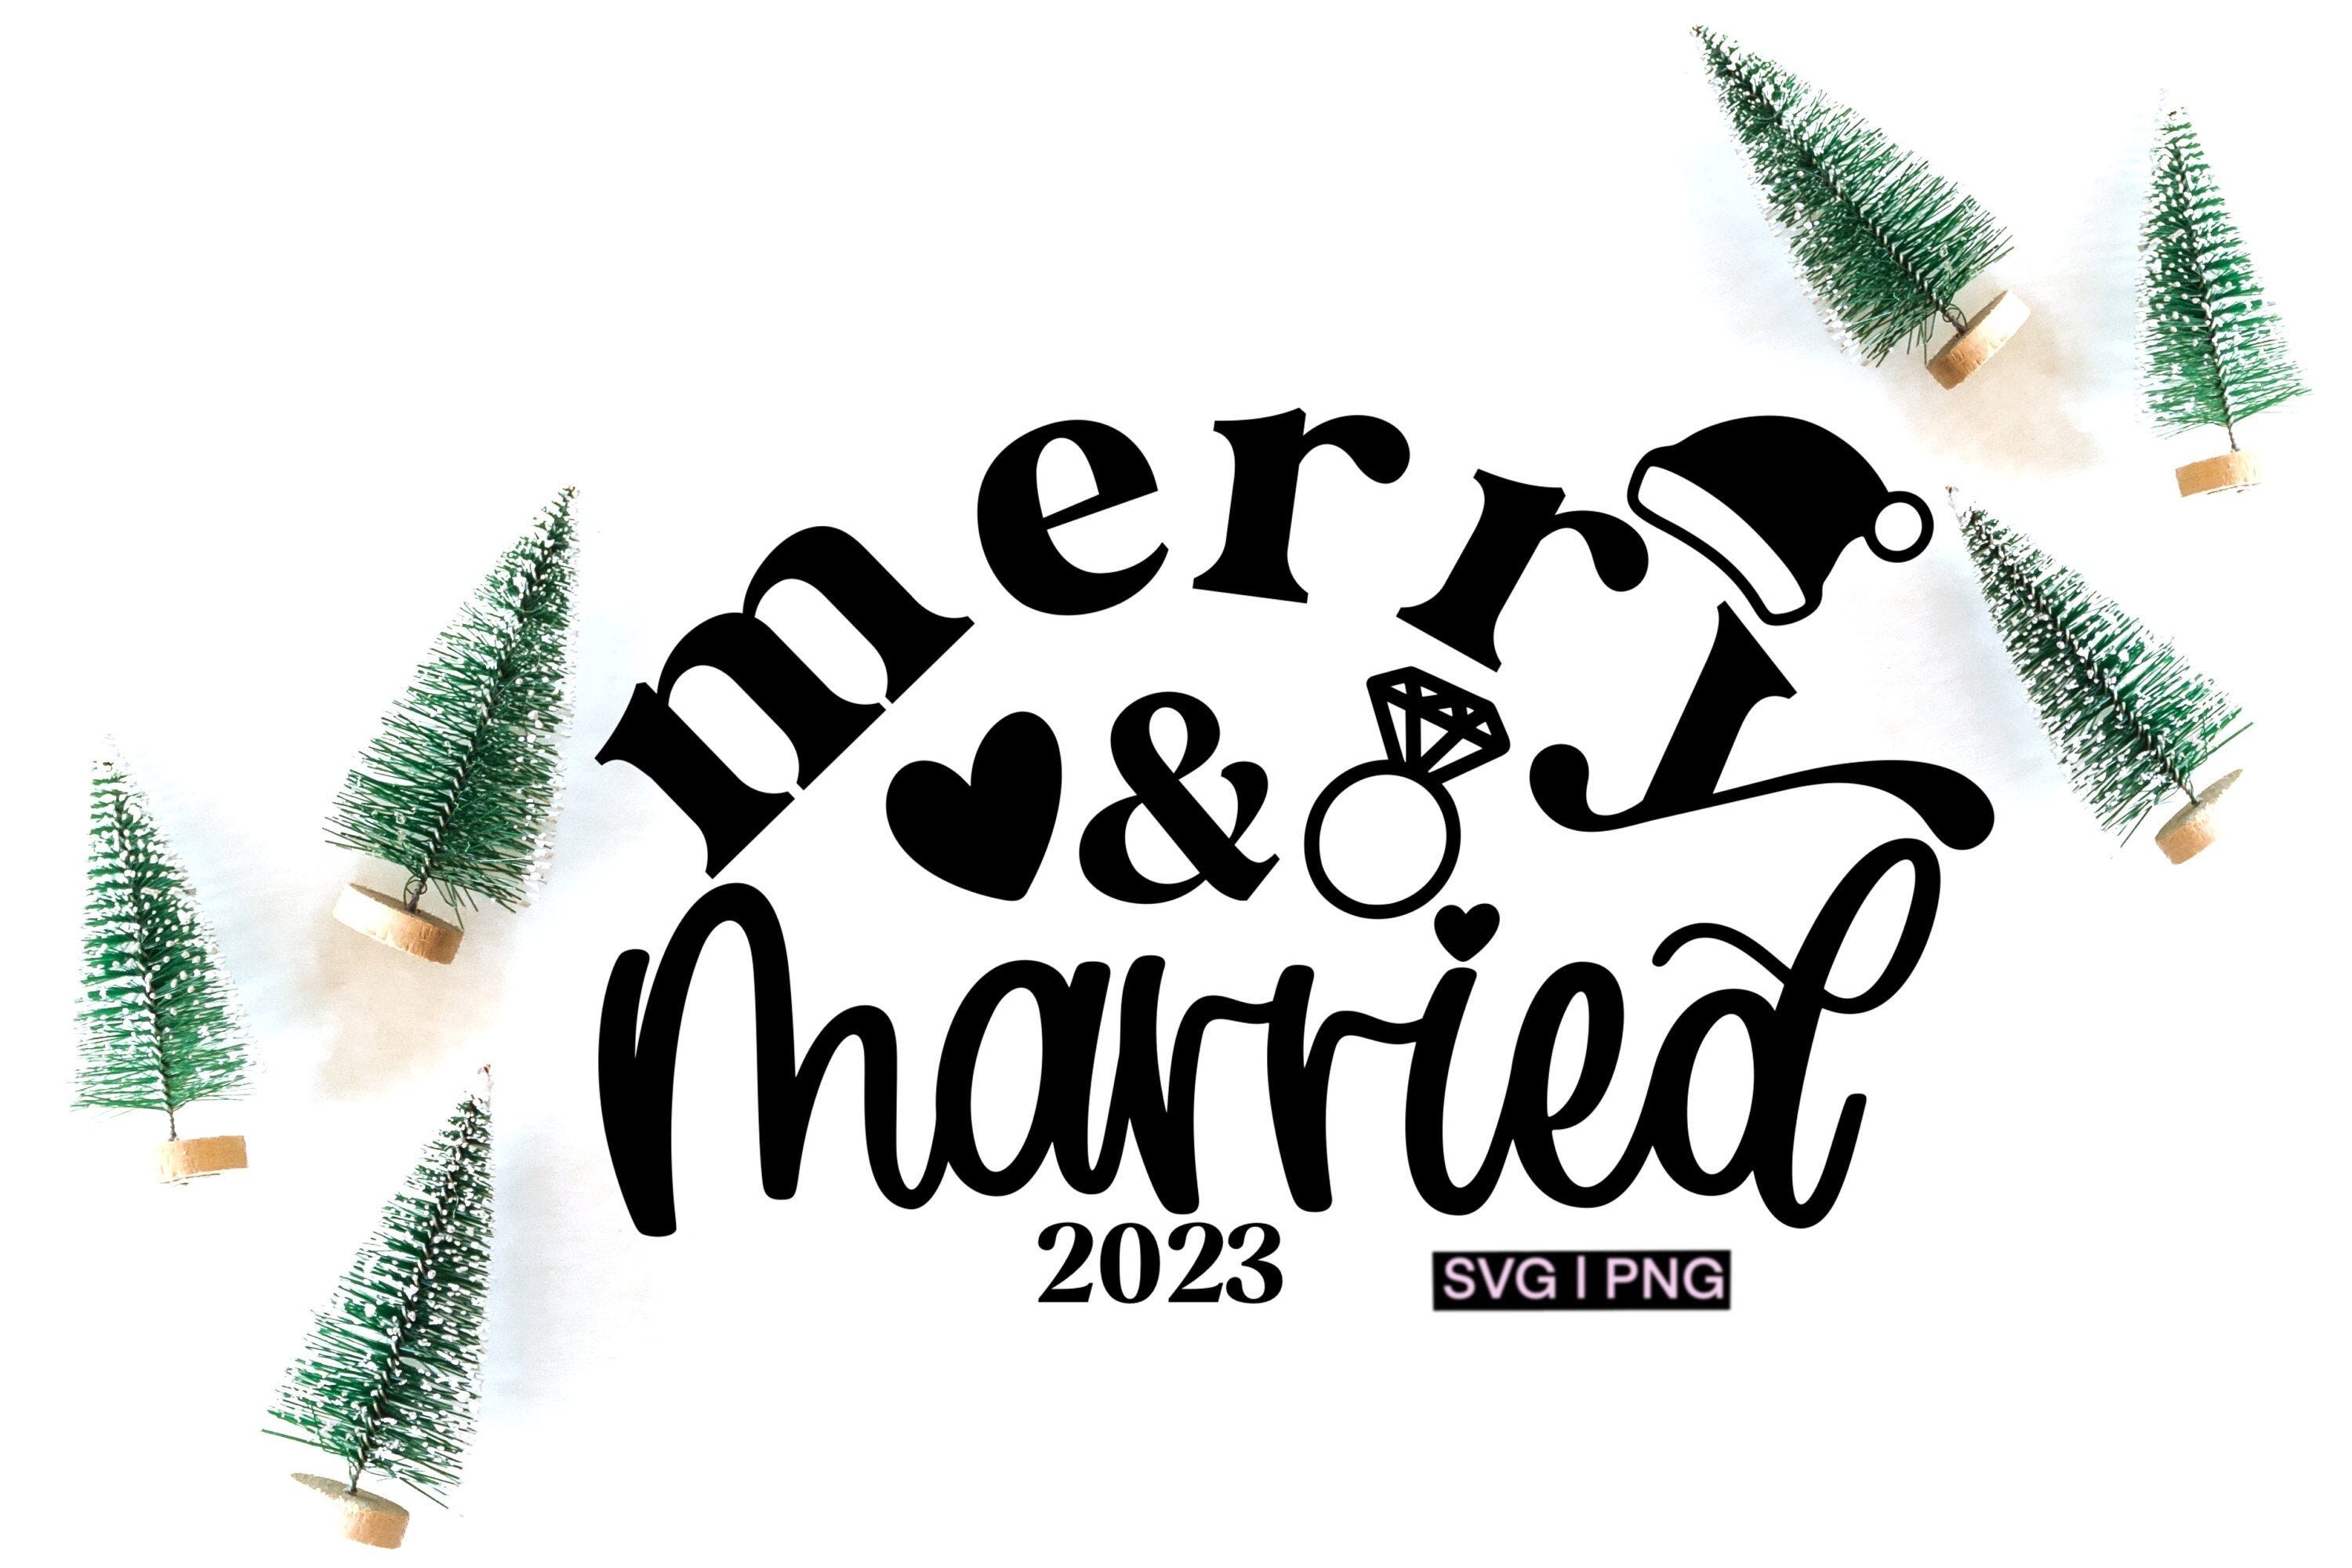 Merry and married svg, married christmas svg, first christmas as mr and mrs svg, wedding ornament svg, hand lettered svg, winter wedding svg